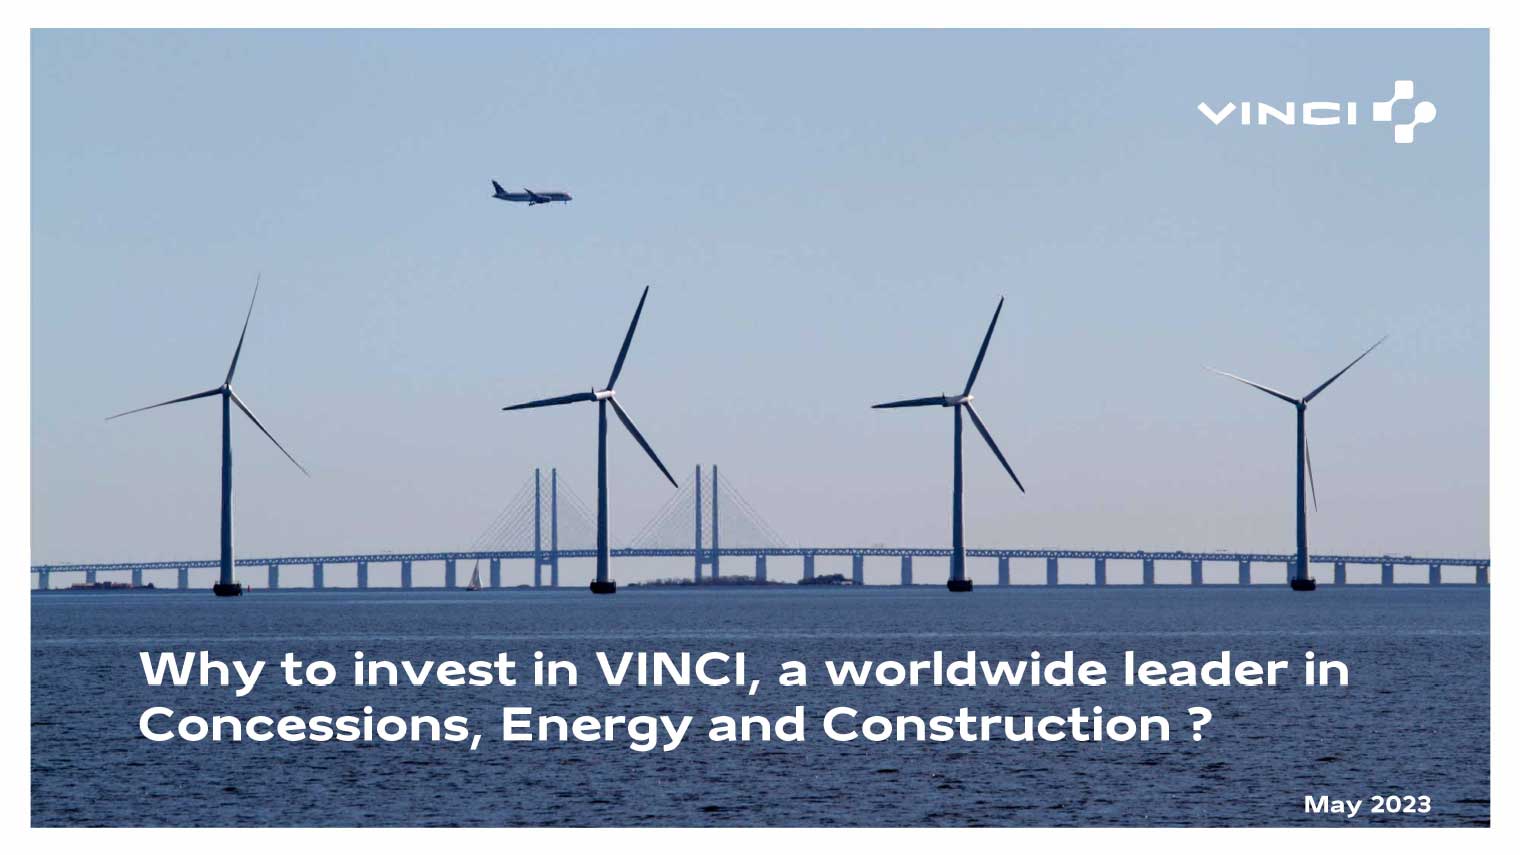 Why to invest in VINCI?